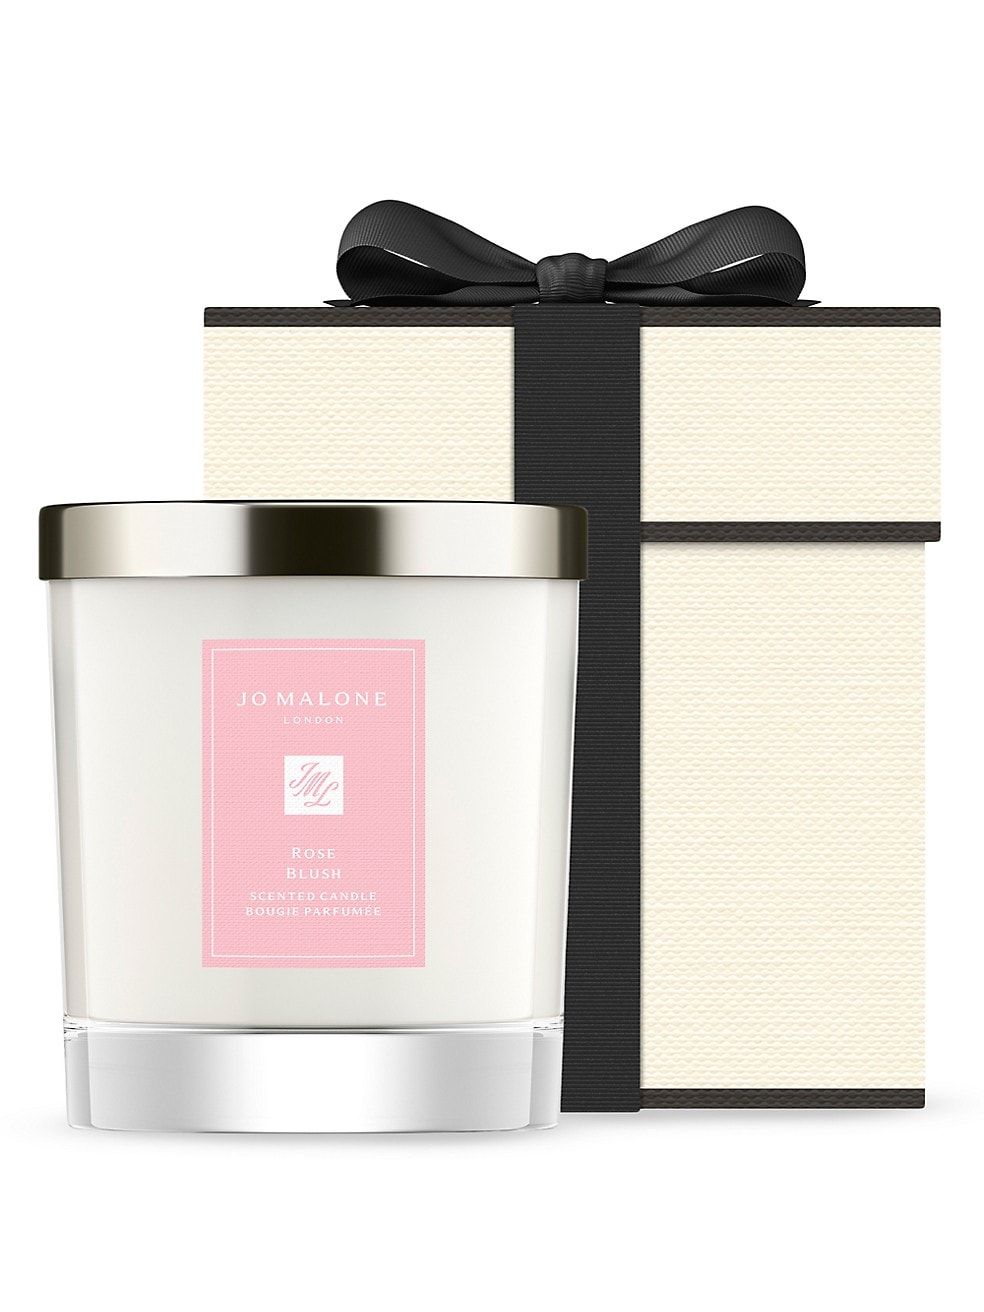 Limited-Edition Rose Blush Home Candle | Saks Fifth Avenue